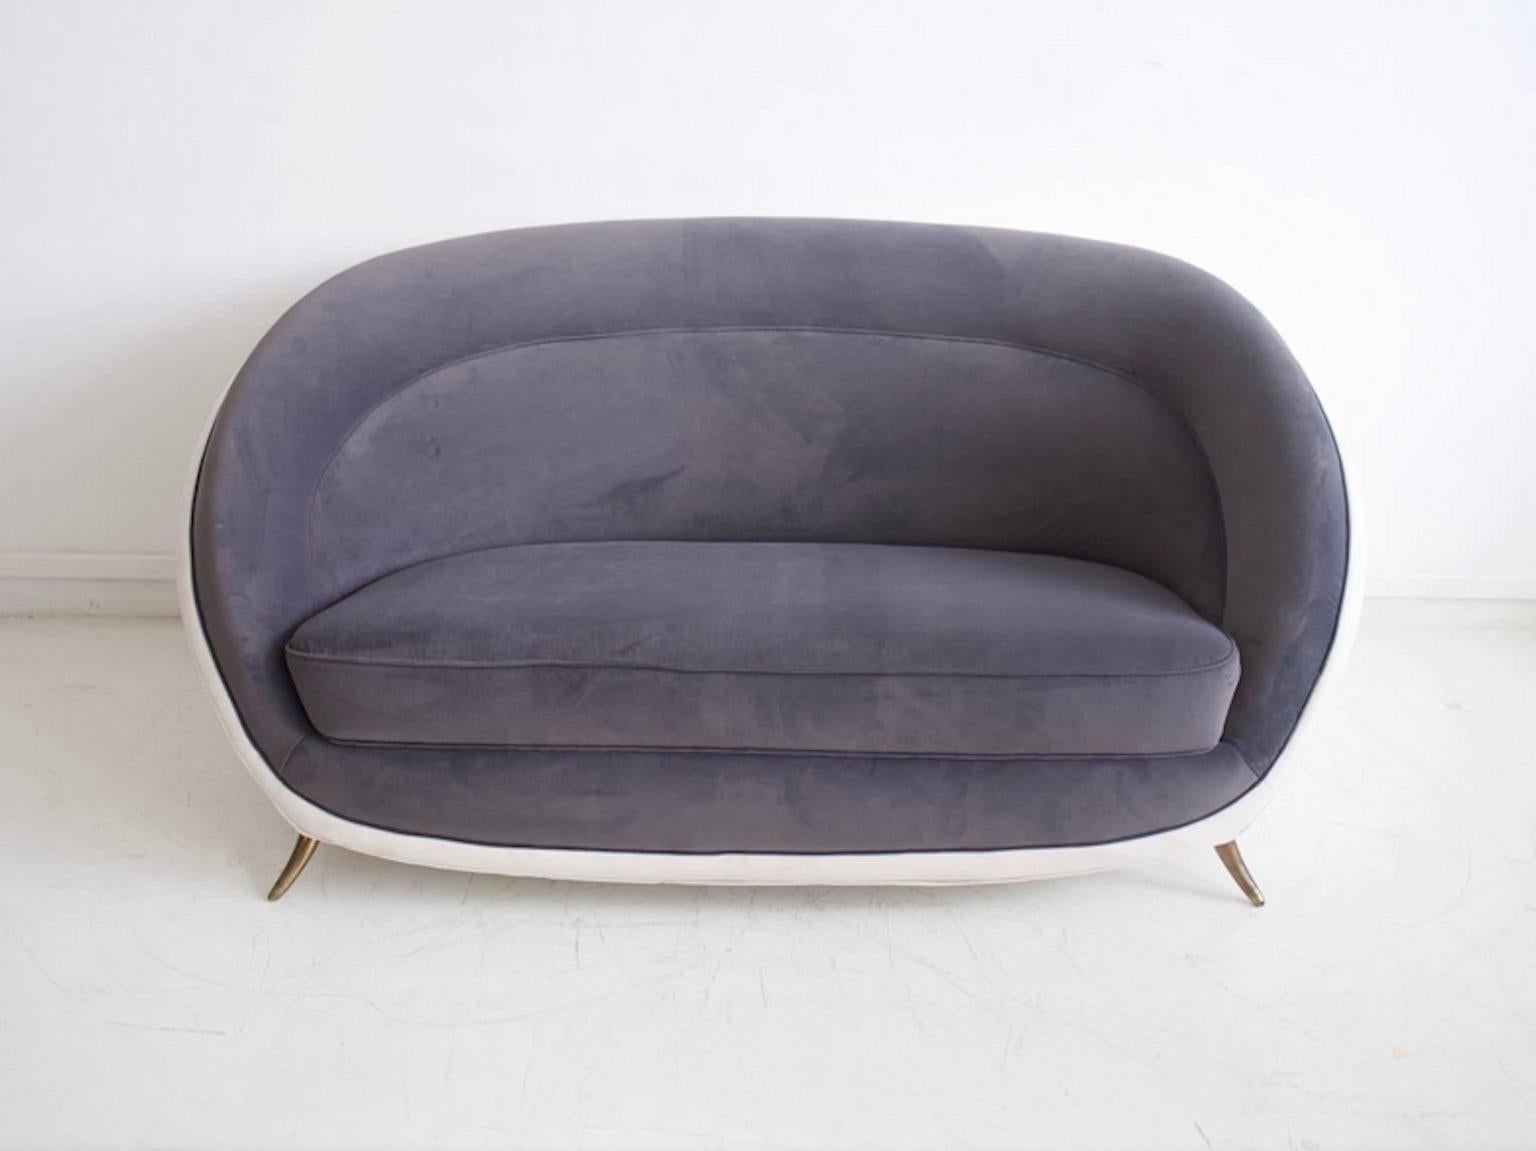 Guglielmo Veronesi sofa with rounded wooden structure, brass legs and velvet upholstery. Produced by ISA, Italy, circa 1950s. Covered in dark grey and white velvet, minor stains on the back of the sofa.